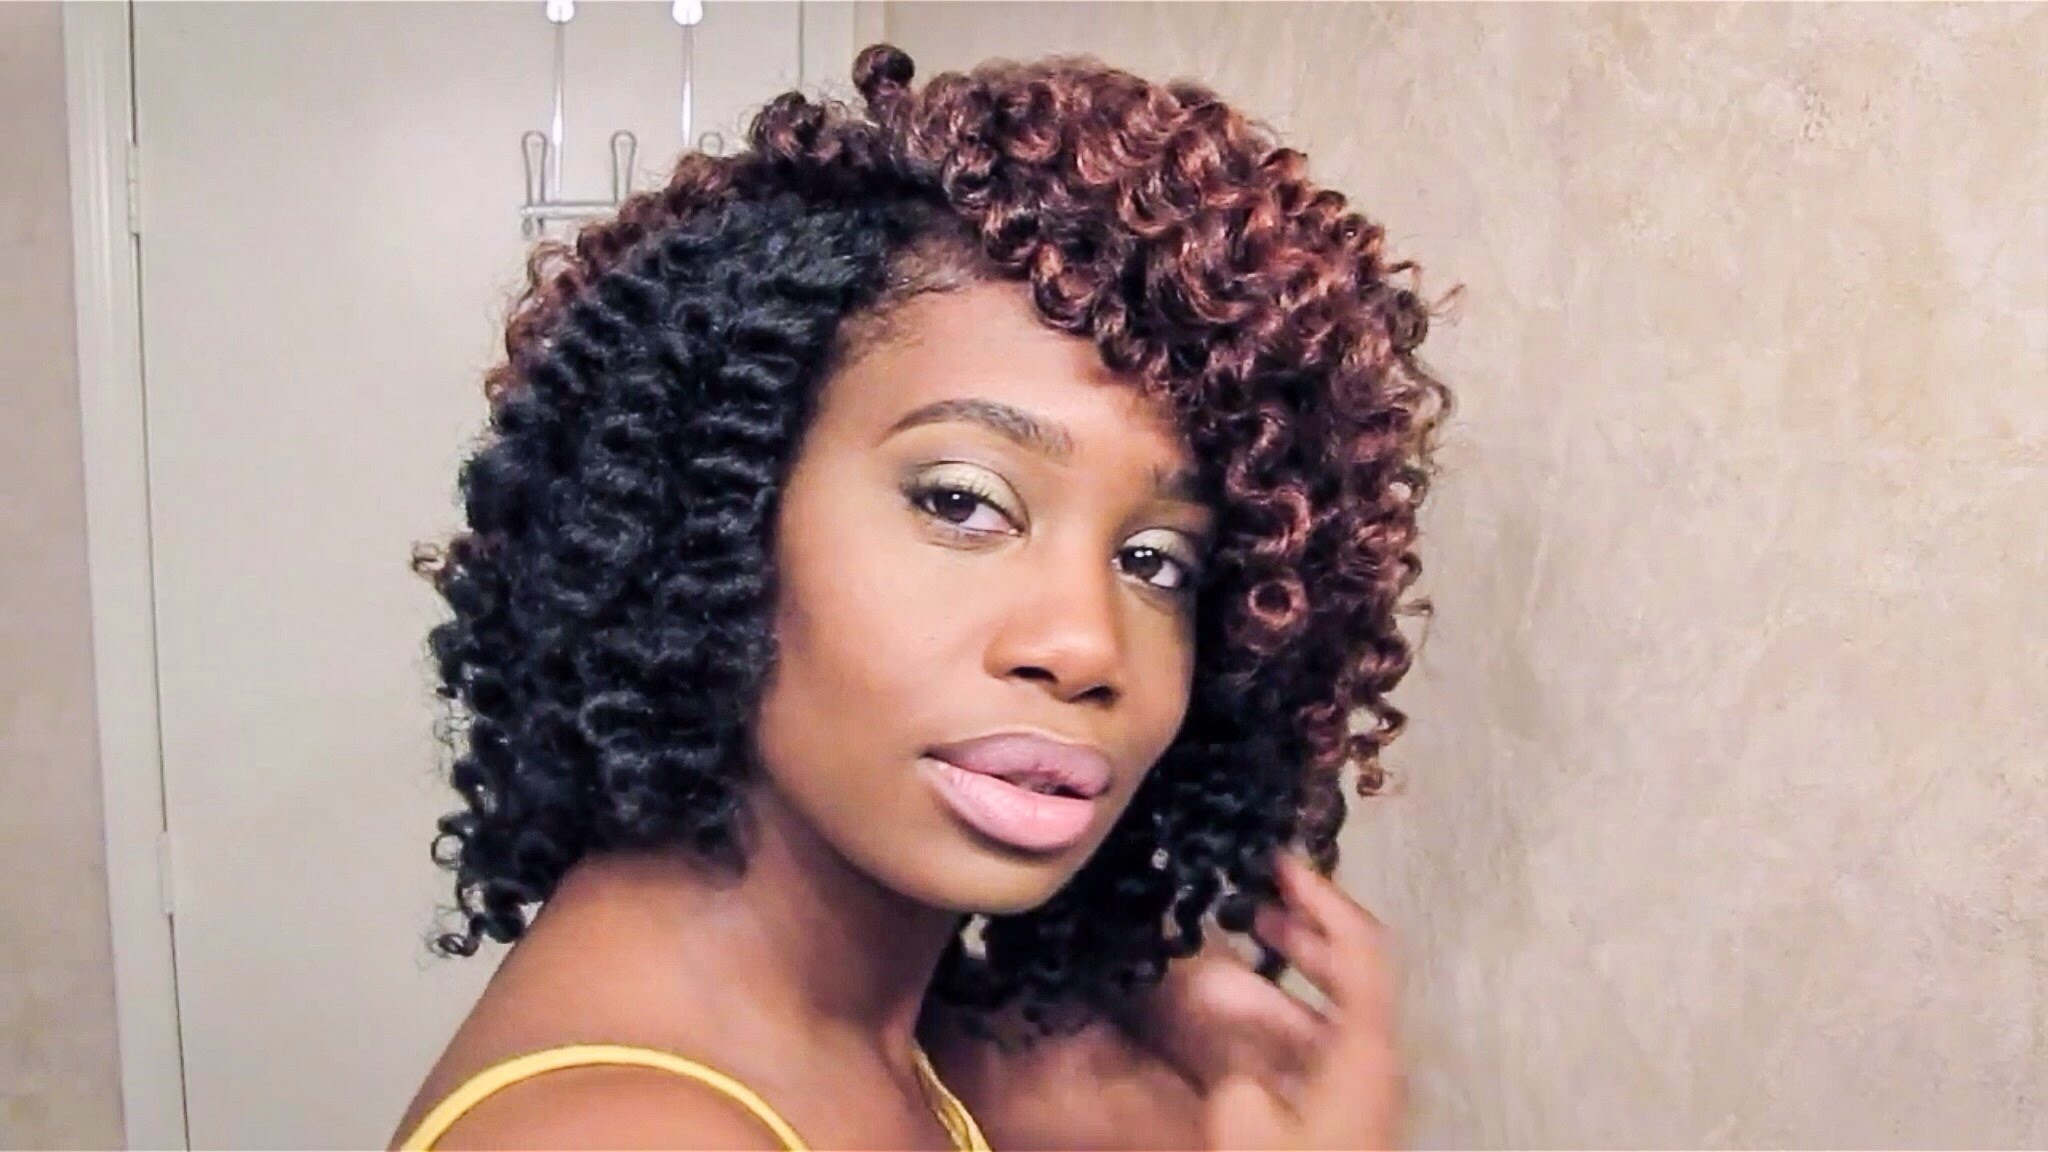 Pictures Of Crochet Braids Hairstyles
 5 Tips for Crochet Braids Beginners